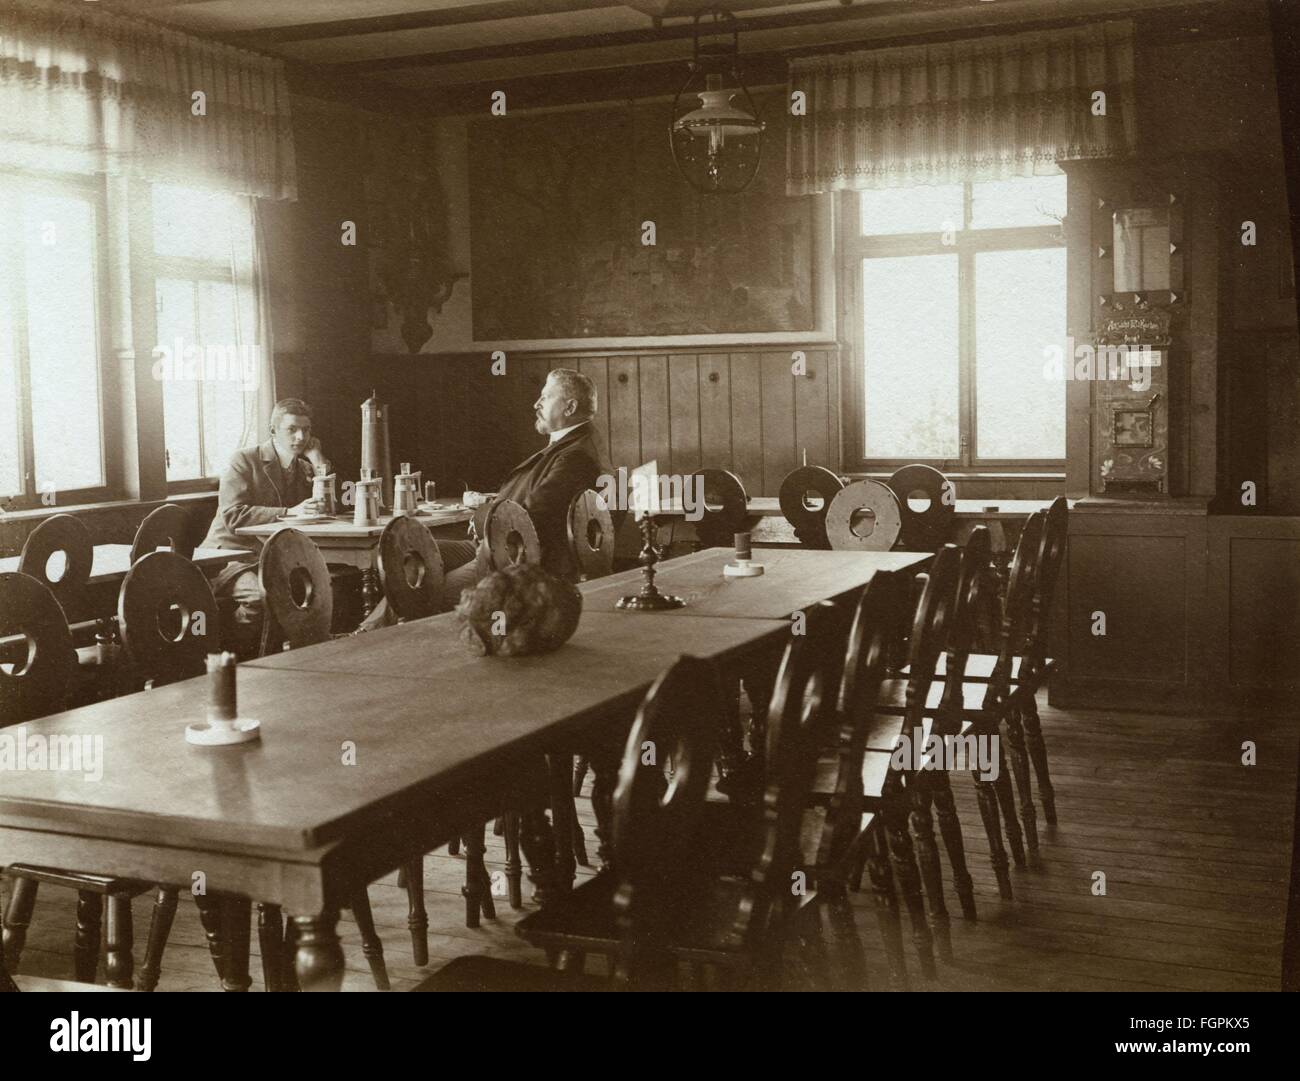 gastronomy, tavern, empty restaurant, only two guests drinking beer, Germany, circa 1911, Additional-Rights-Clearences-Not Available Stock Photo